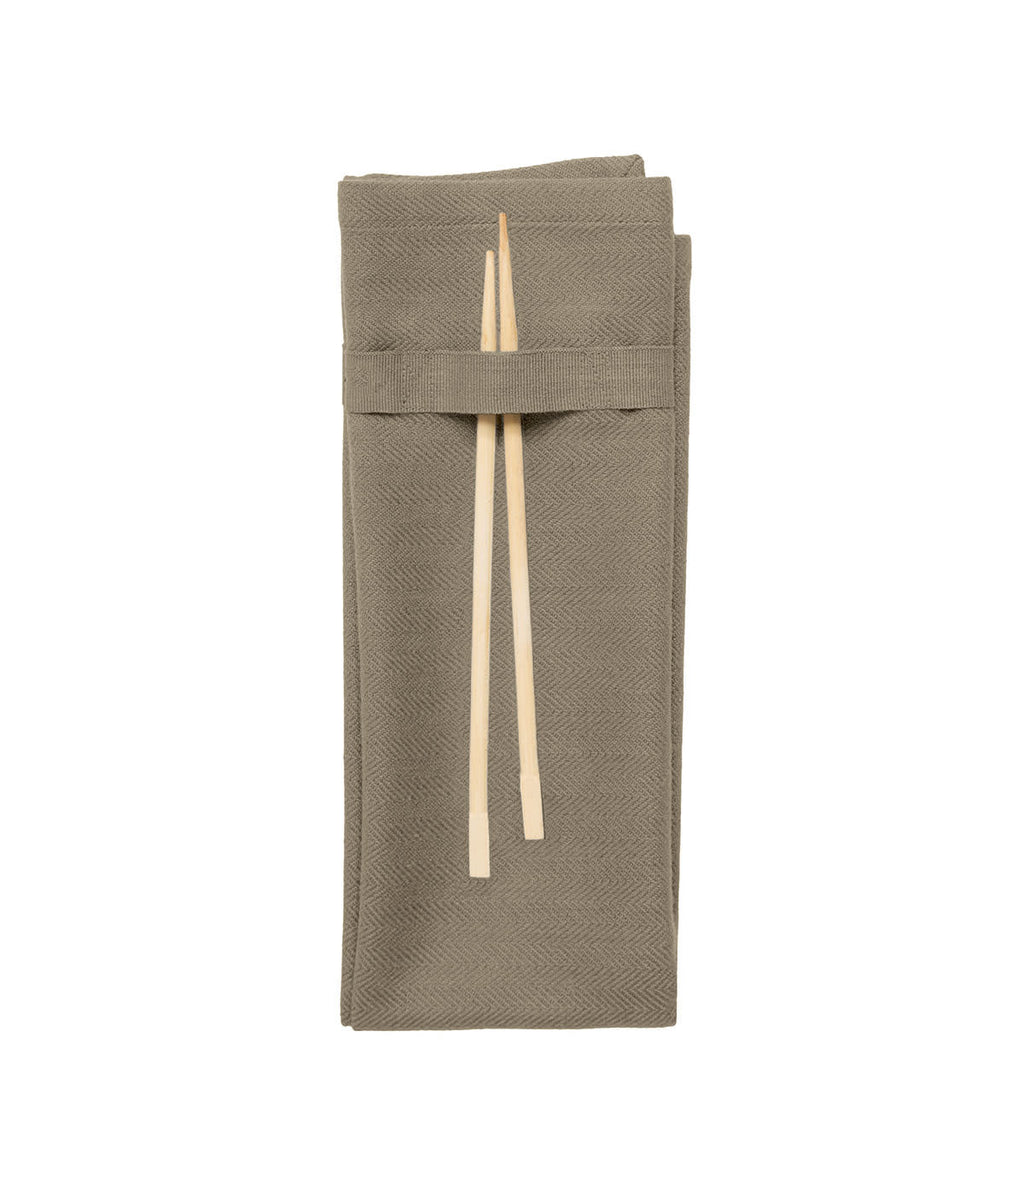 napkins in multiple colors by the organic company 2